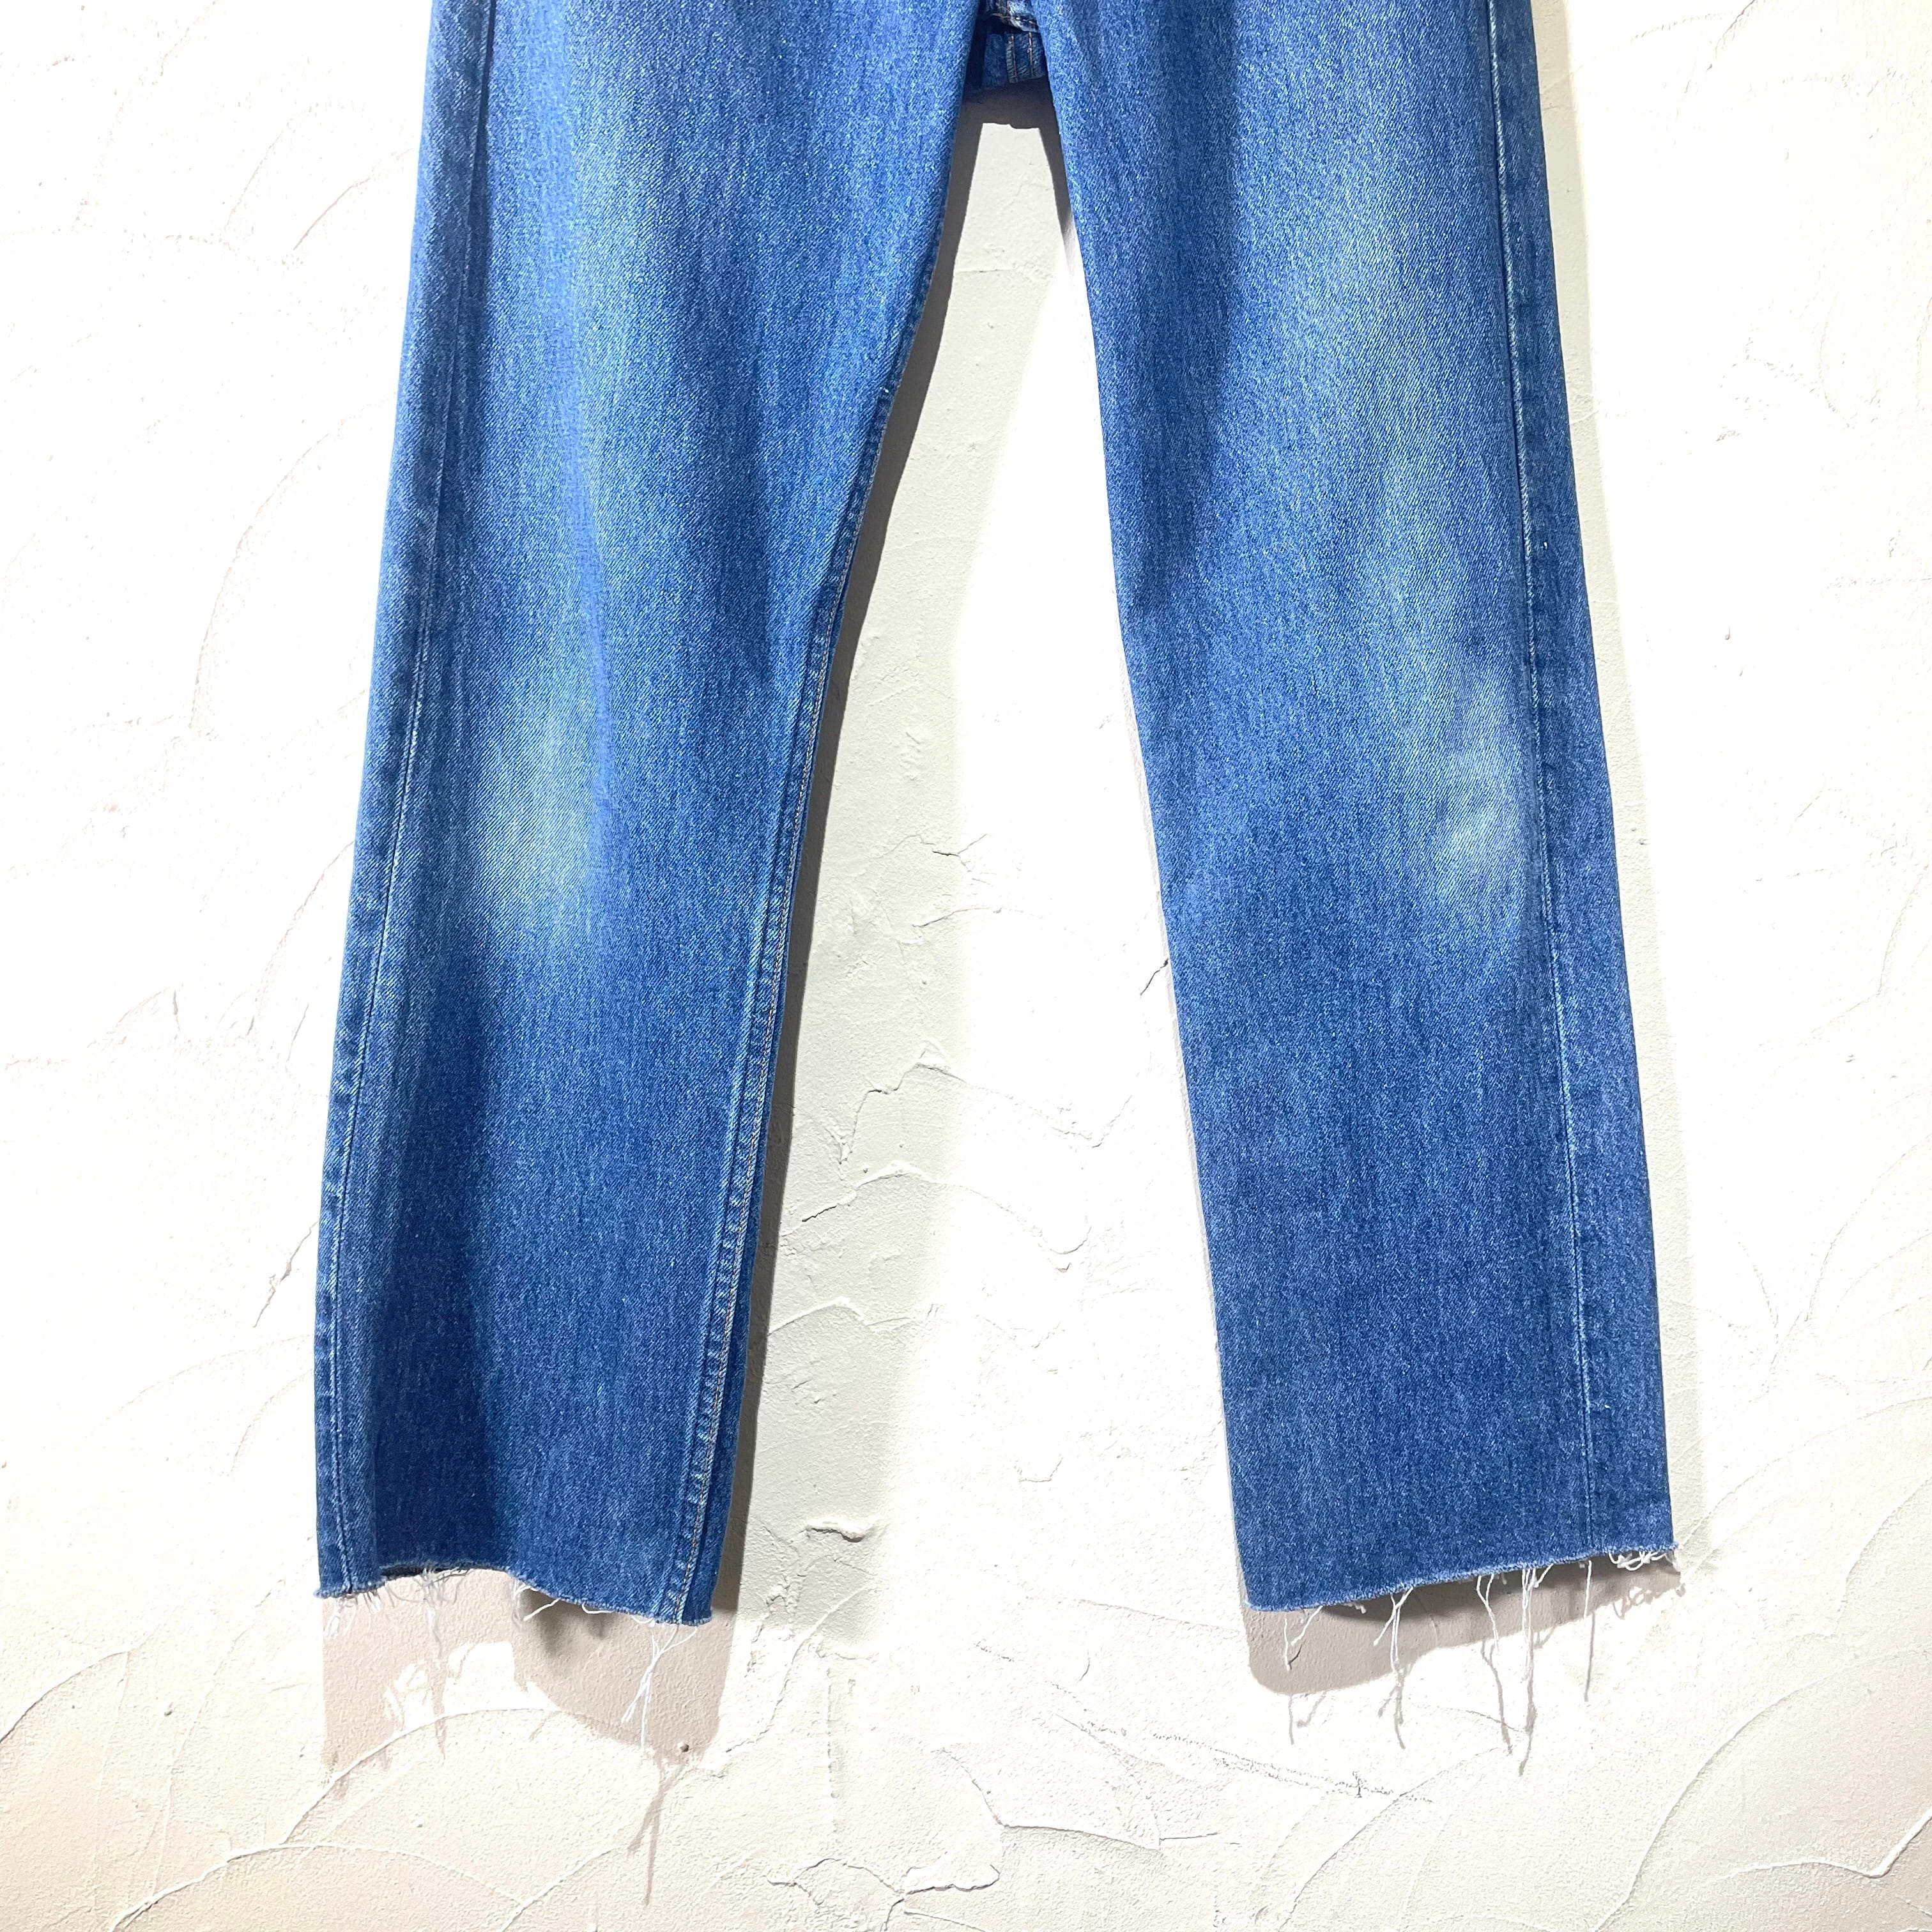 90s made in USA Levi's 501 denim pants W29